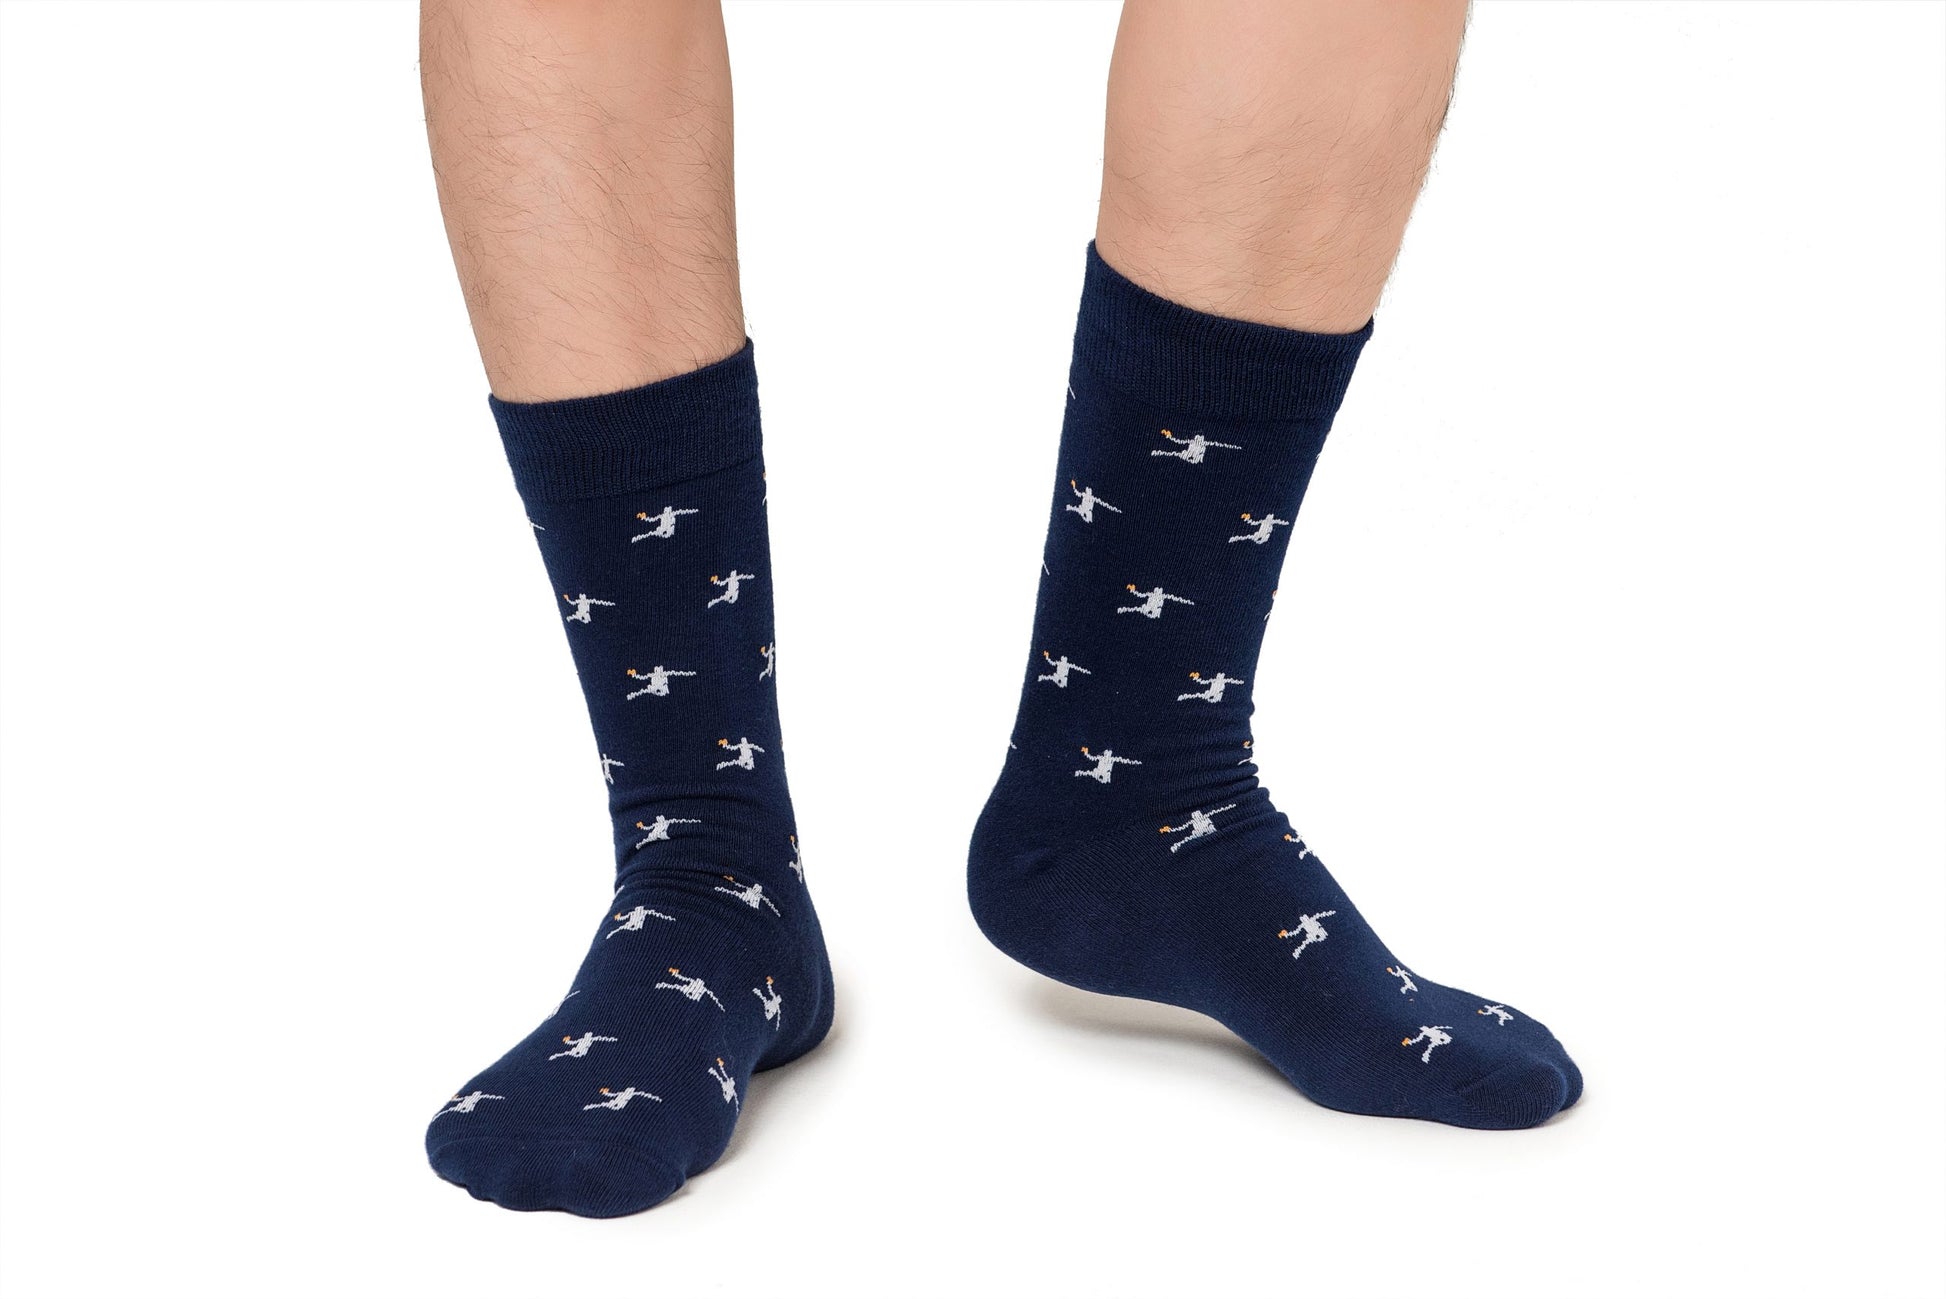 A pair of Basketball Dunk Socks with legs.